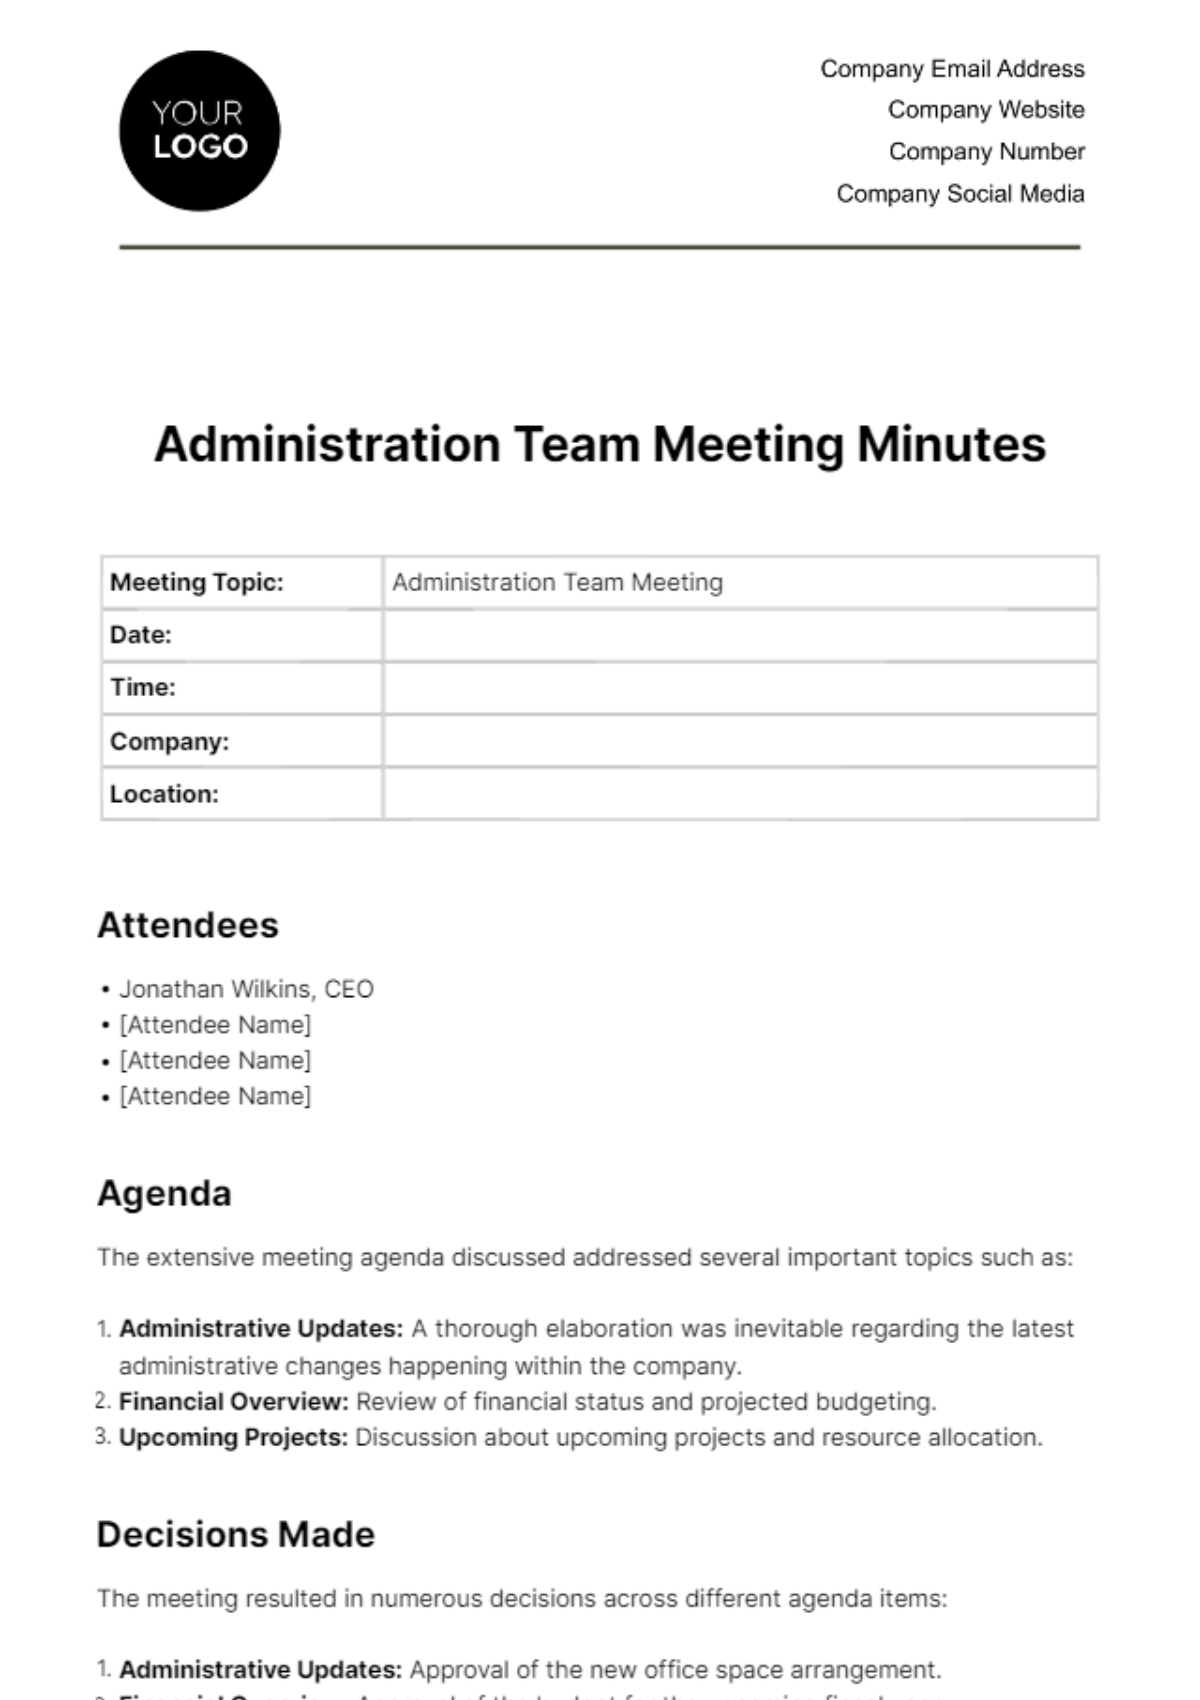 Administration Team Meeting Minute Template